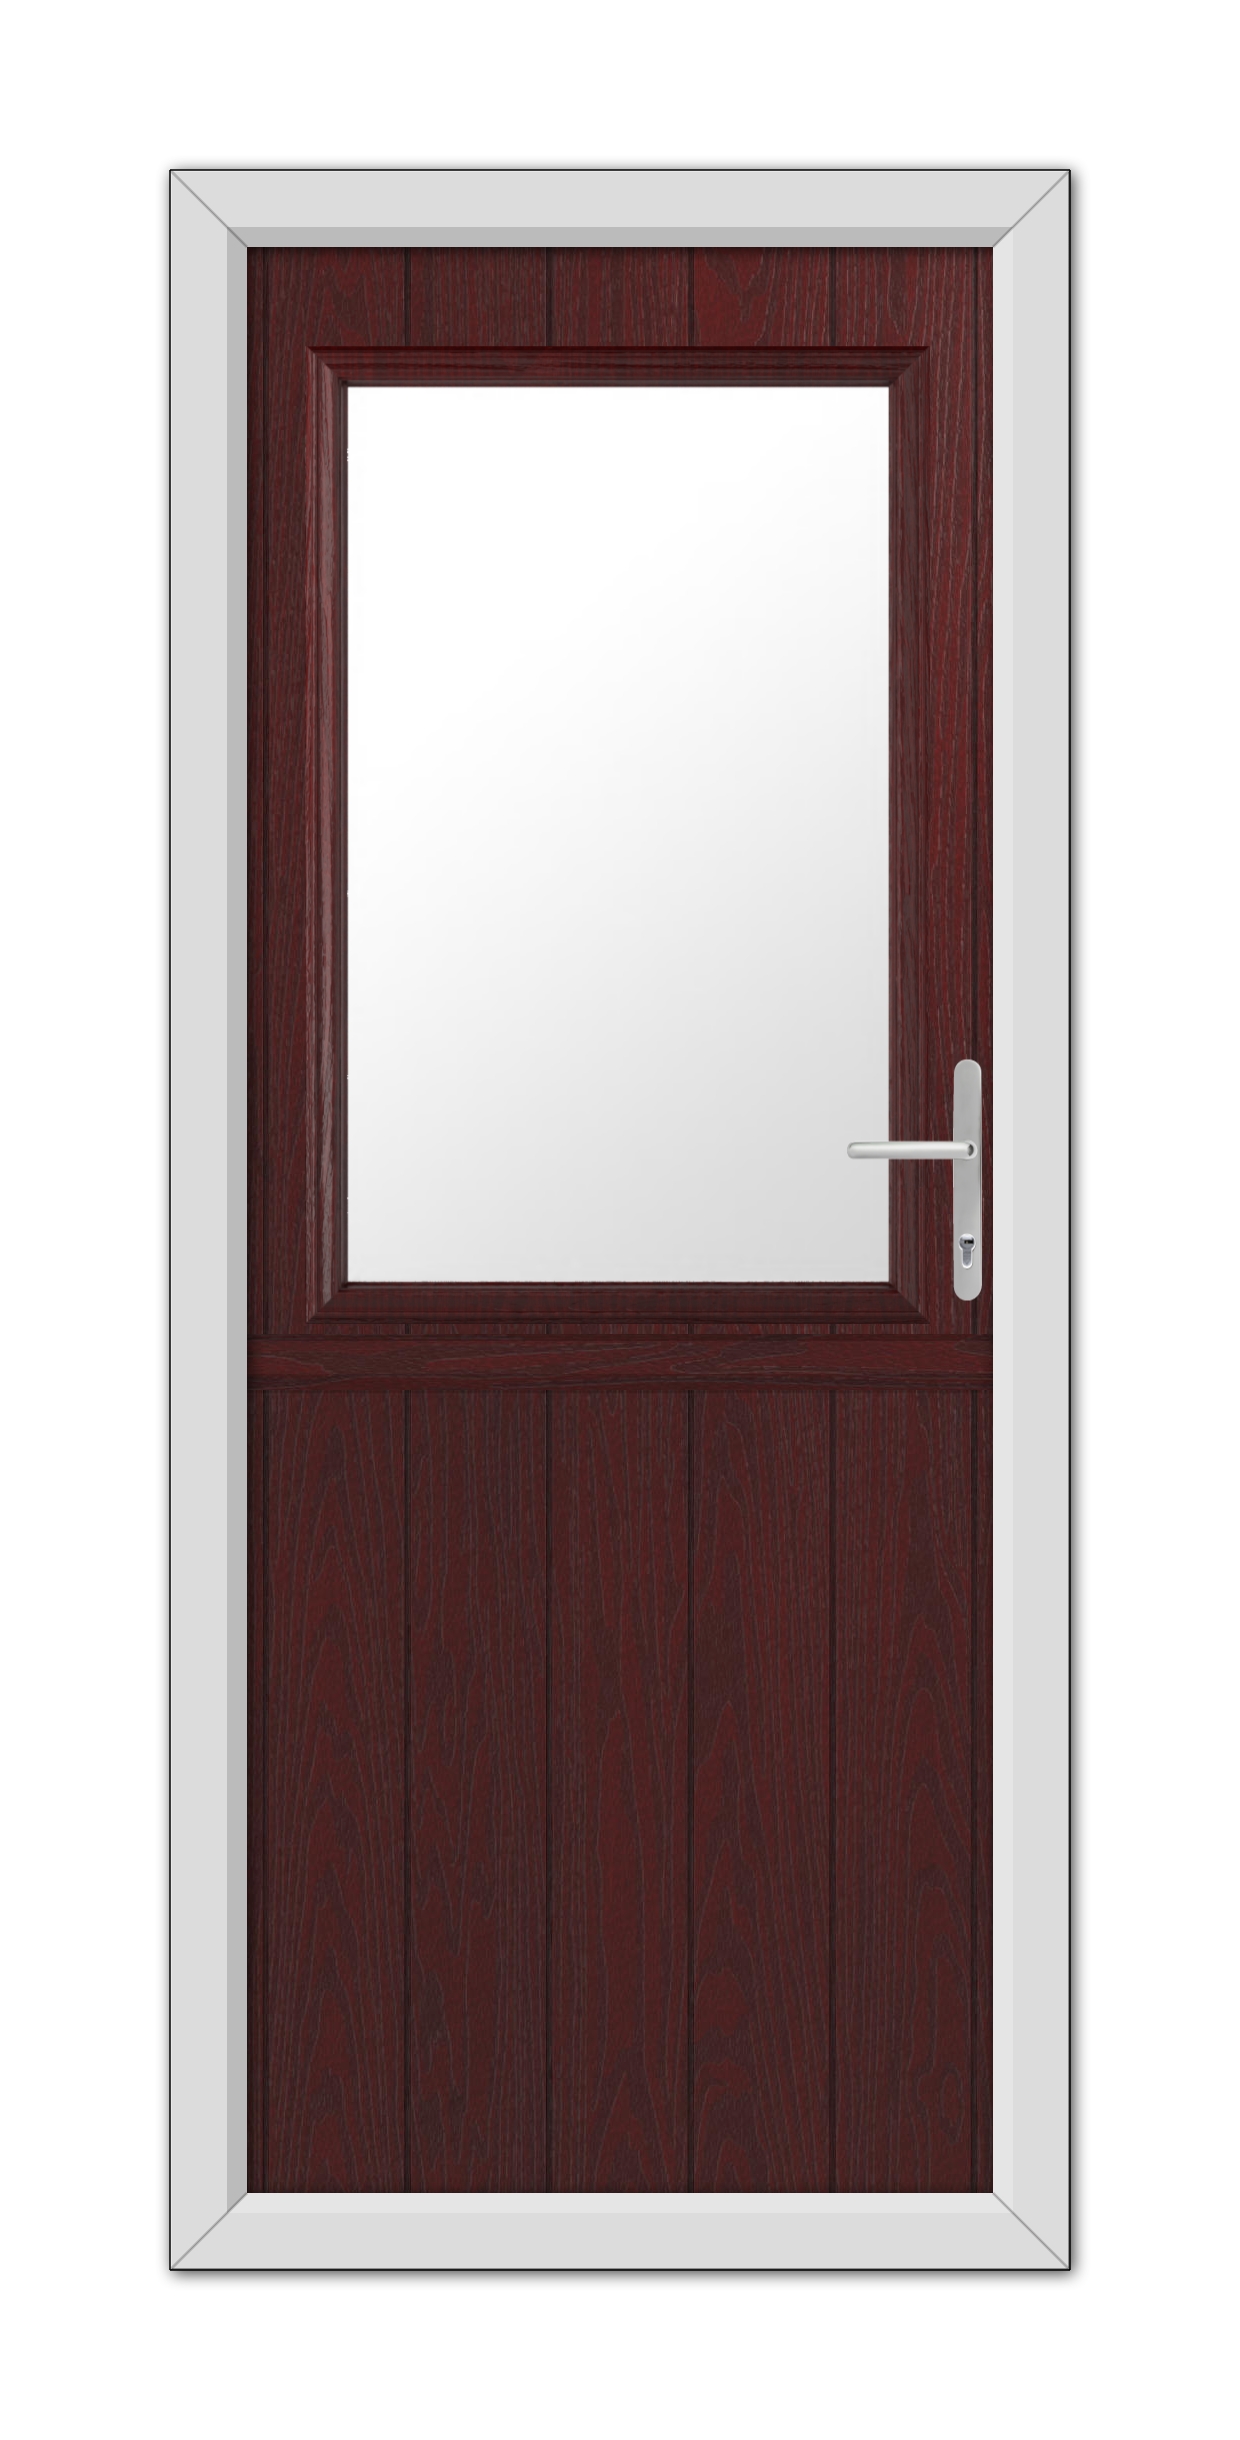 A closed Rosewood Clifton Stable Composite Door 48mm Timber Core with a square glass window and a silver handle, framed in white.